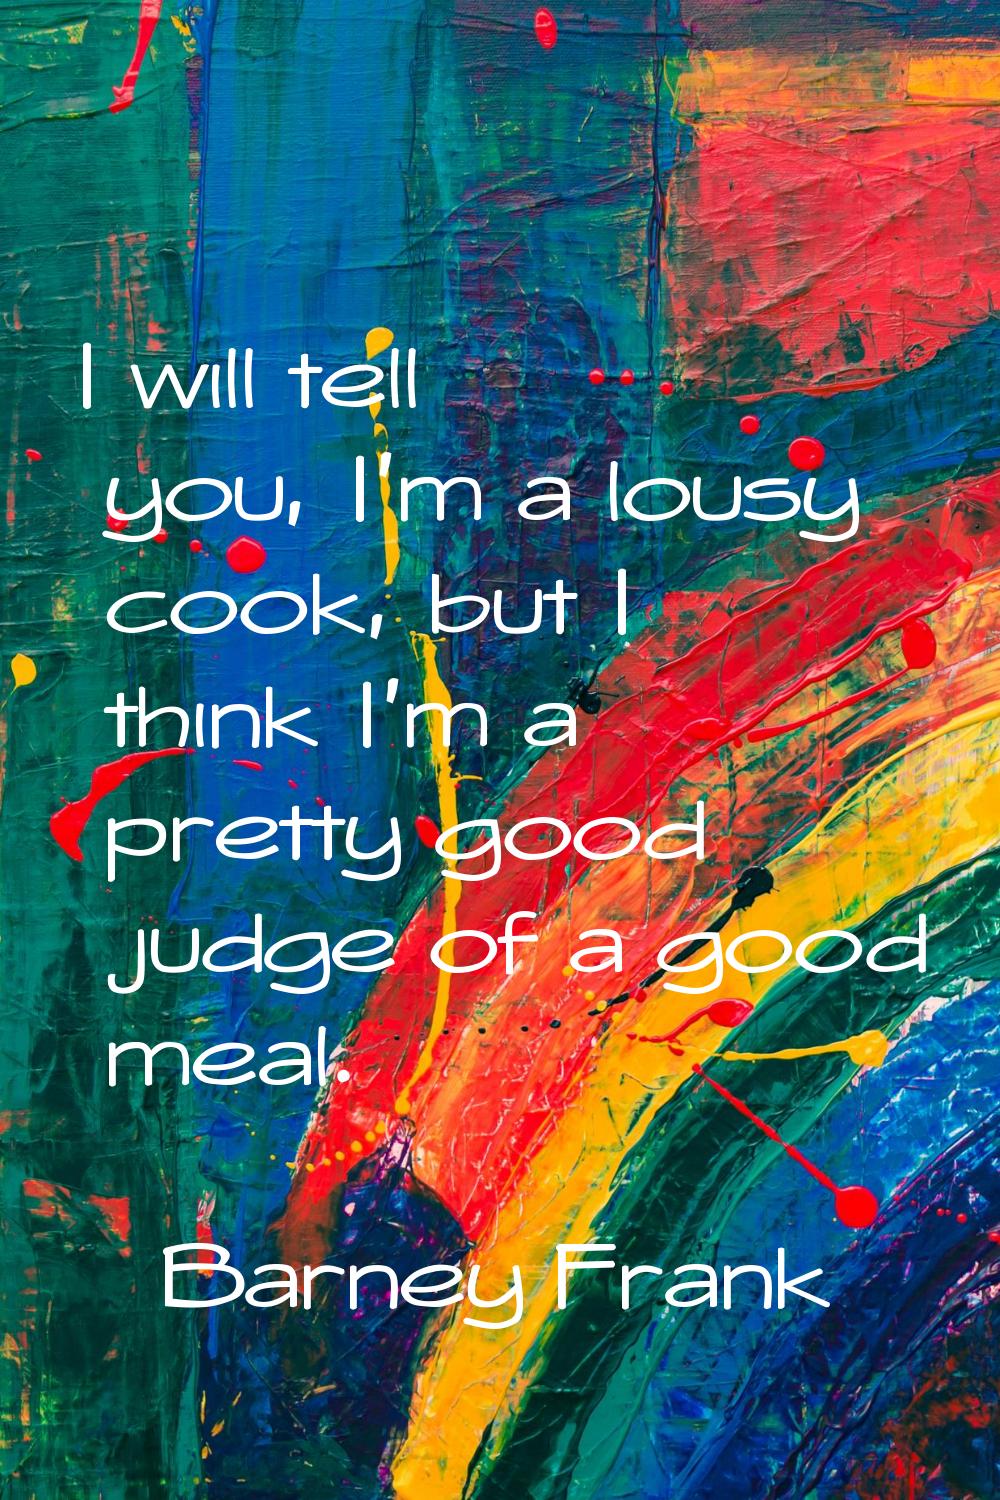 I will tell you, I'm a lousy cook, but I think I'm a pretty good judge of a good meal.